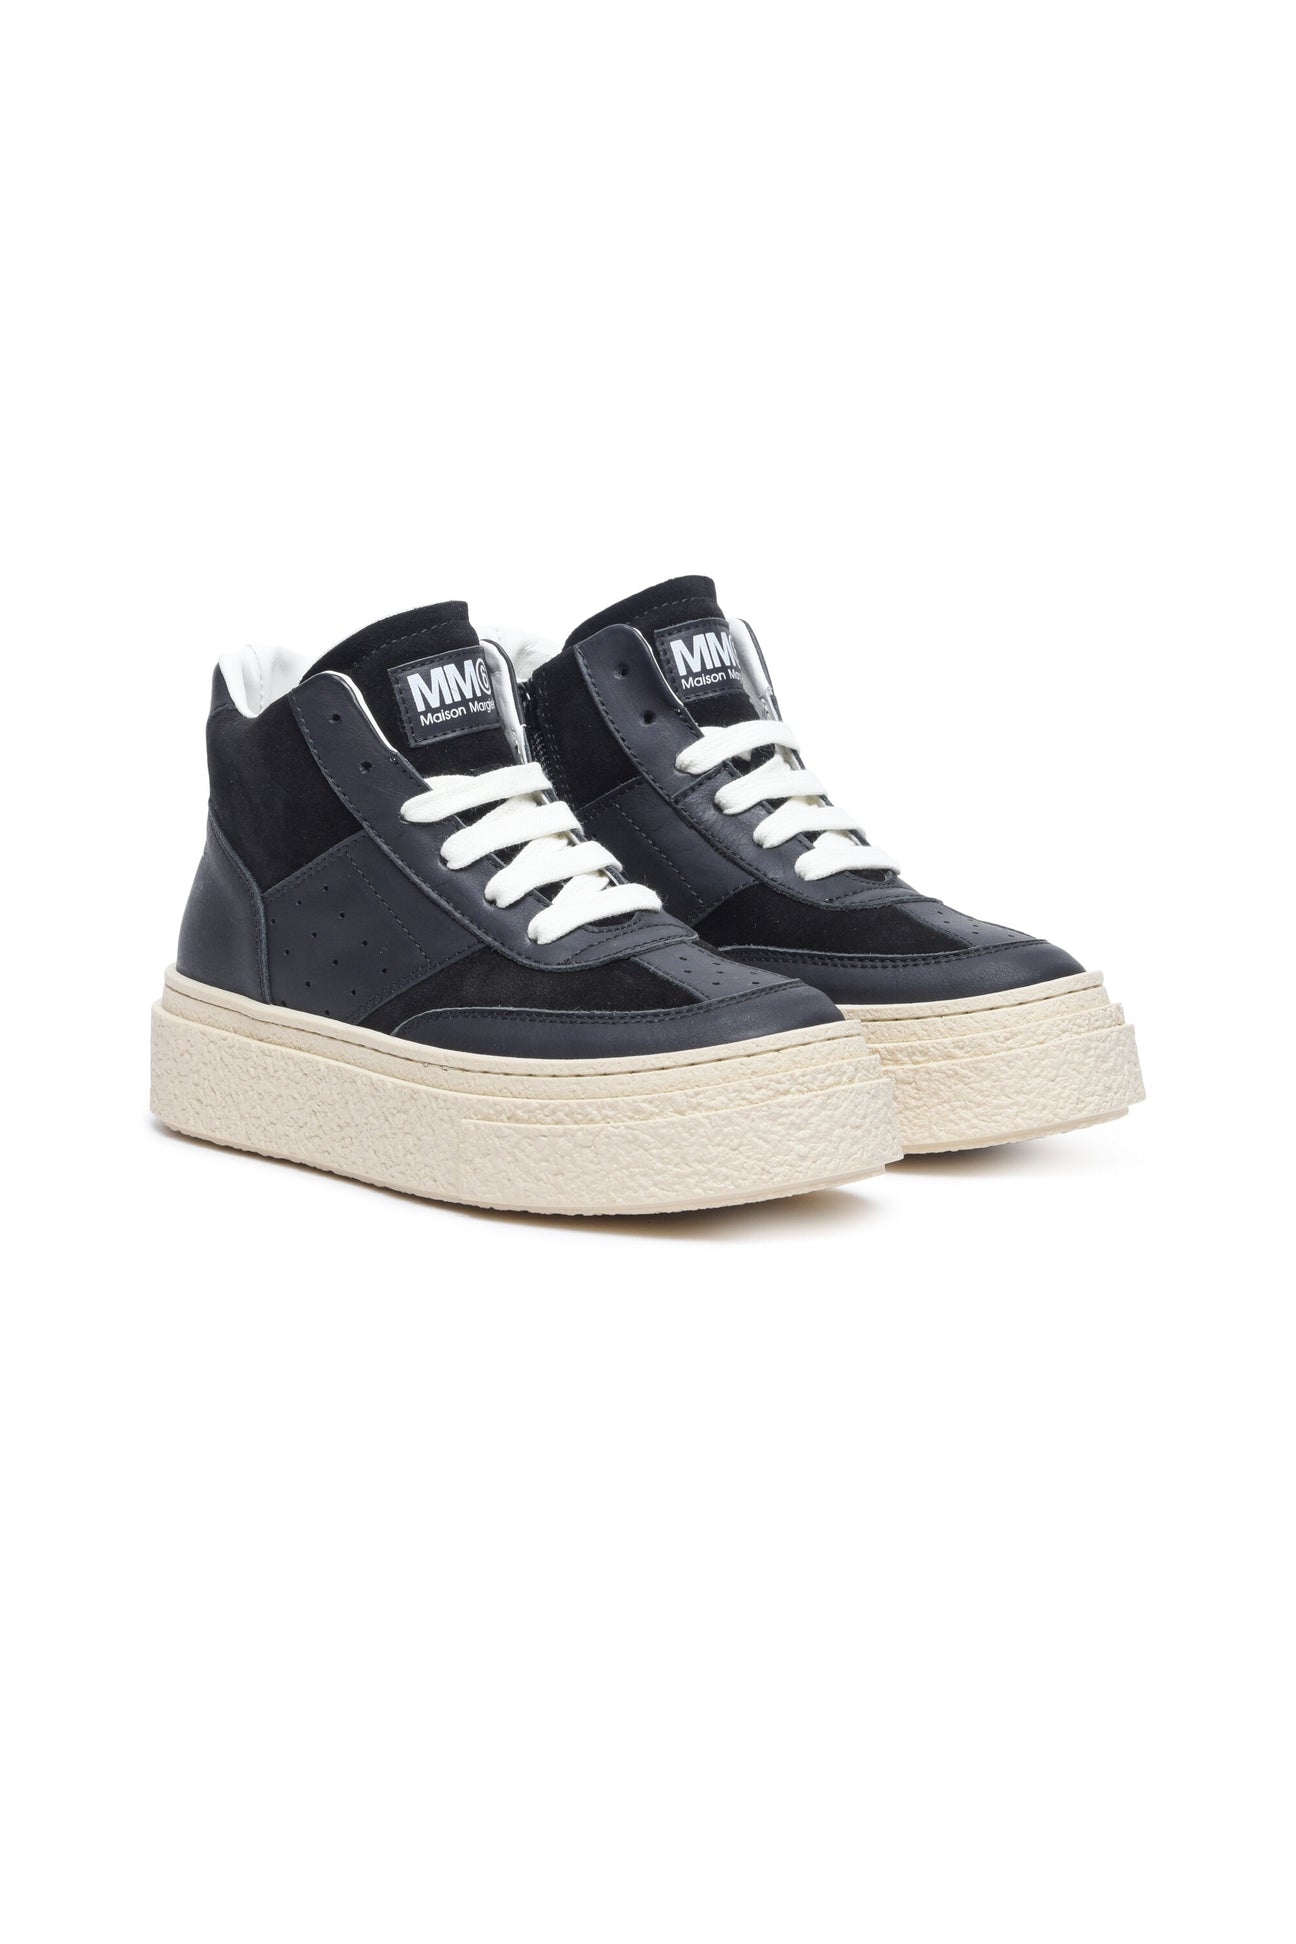 High court sneakers shoes High court sneakers shoes